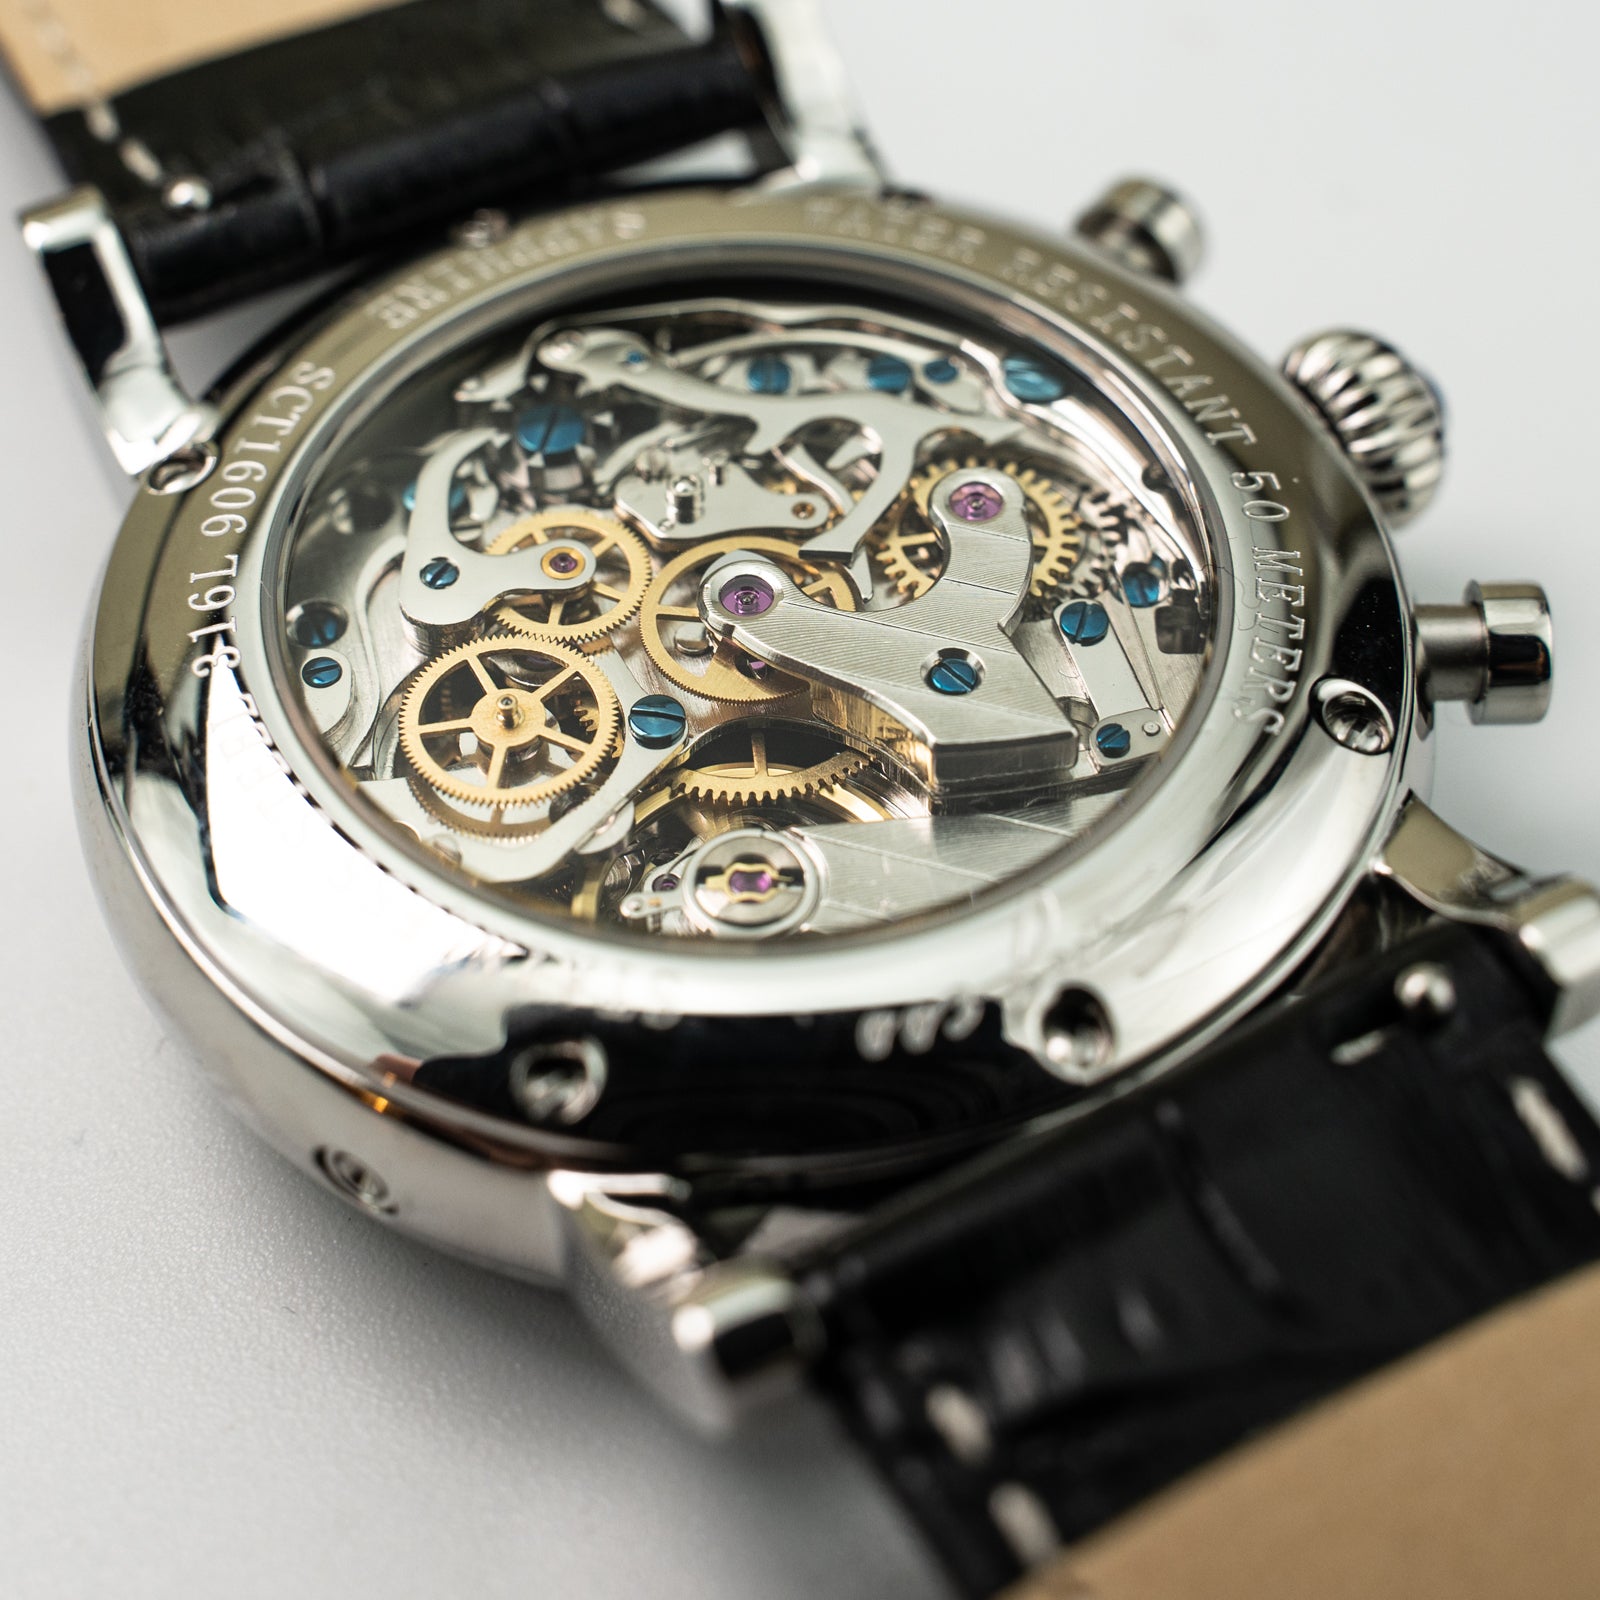 Sugess Seagull ST1901 Movement Vintage Chronograph Watch SU1901SW ...